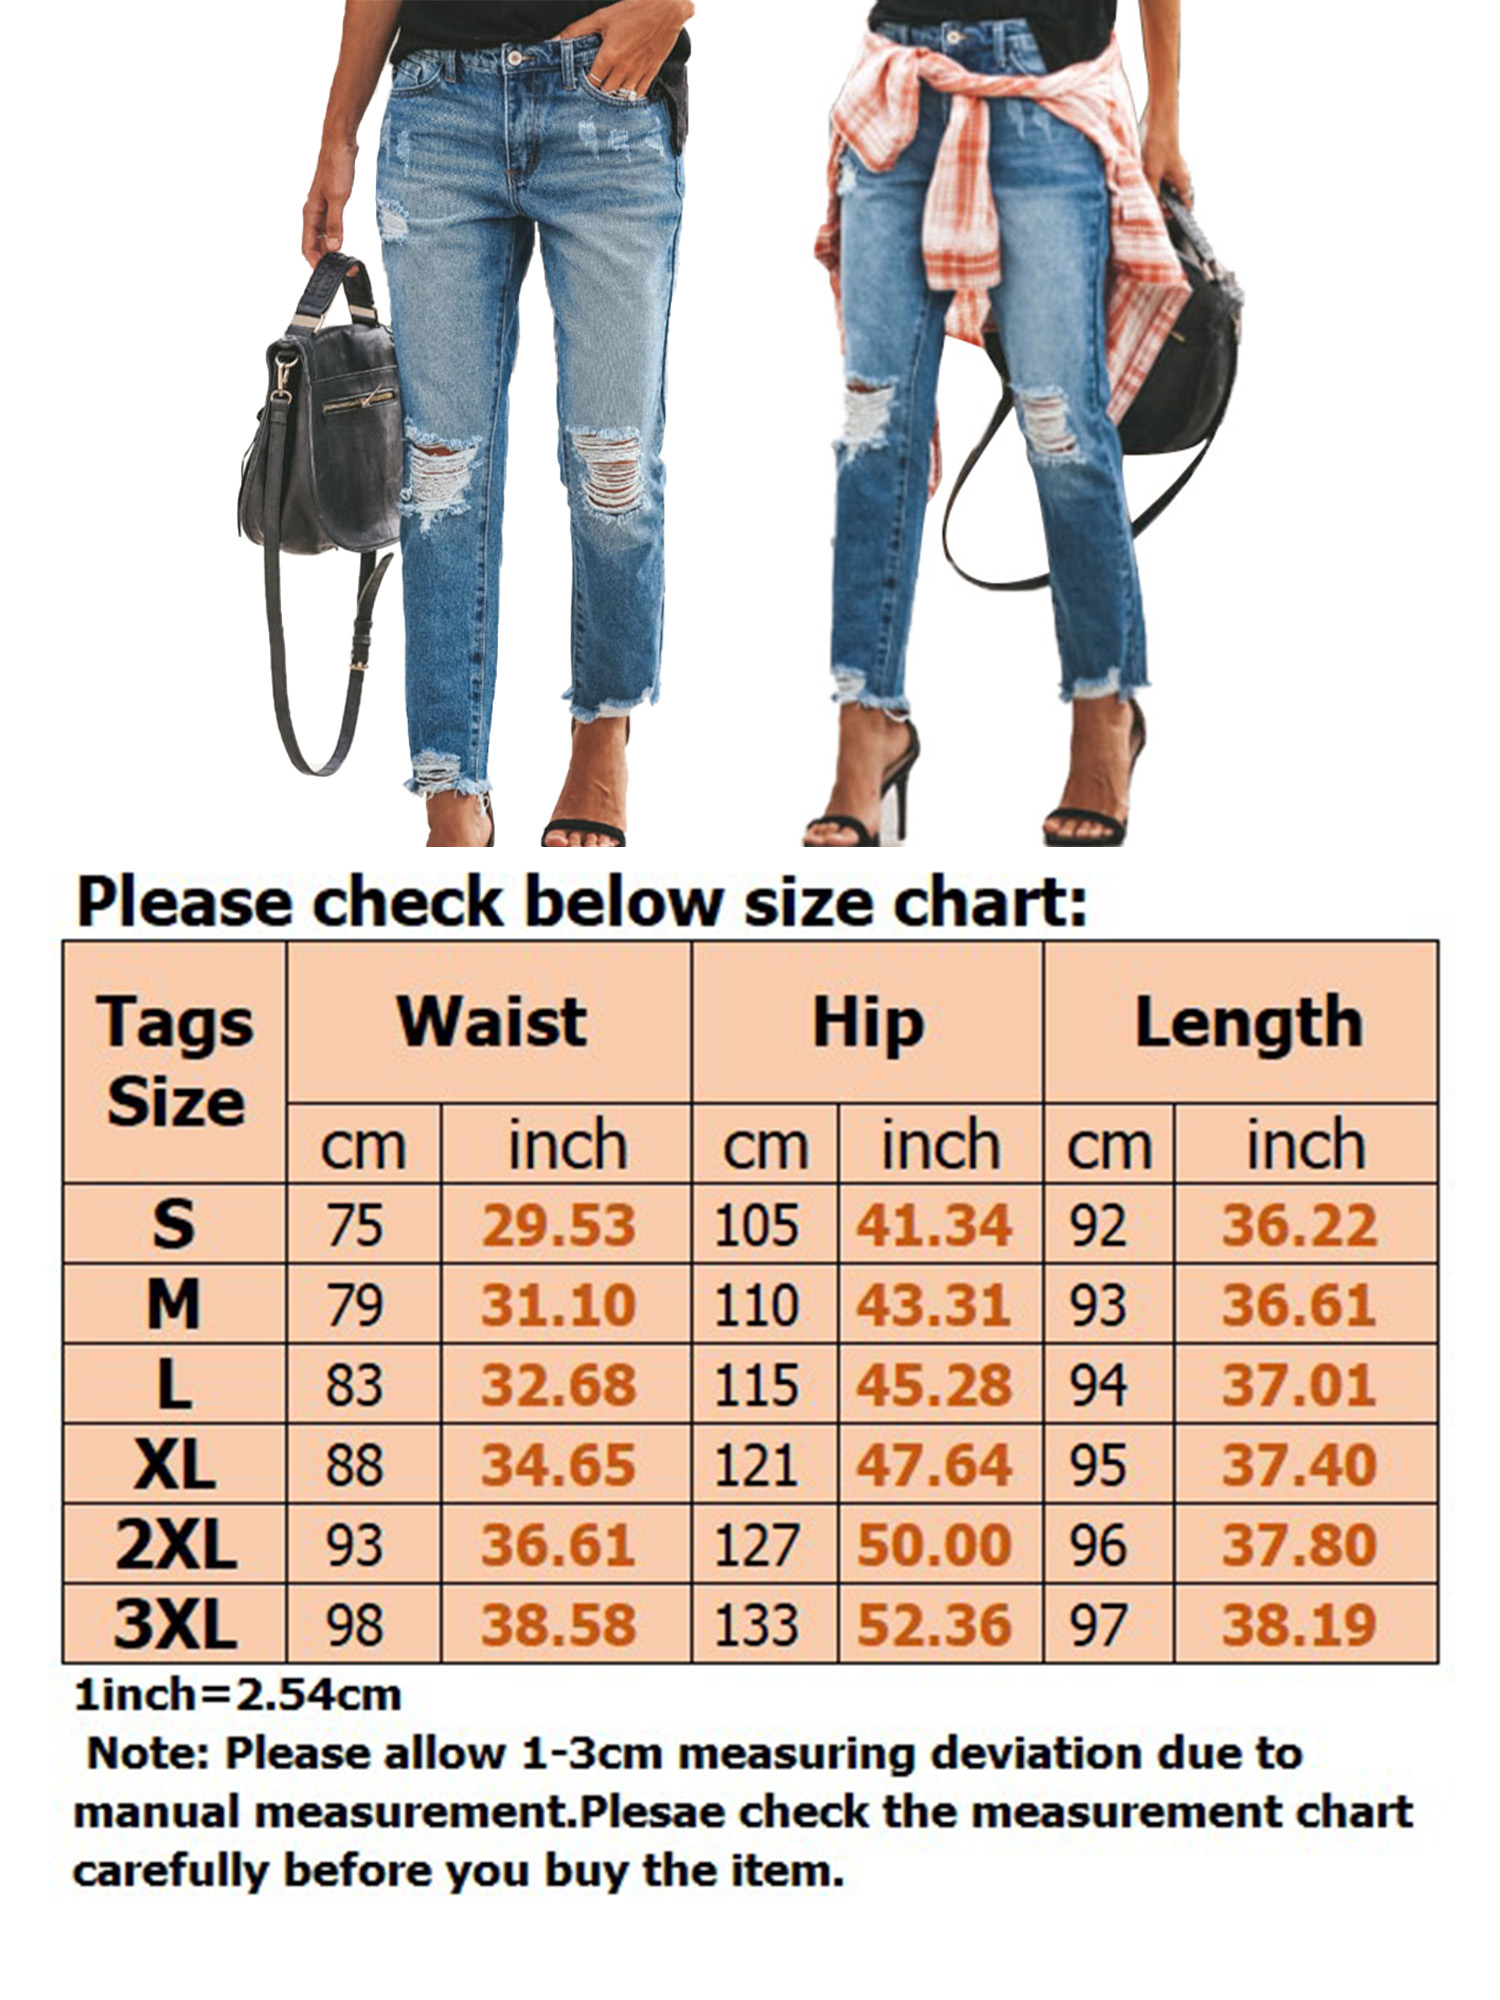 Hight Waist Ripped Denim Jeans Pant For Women Skinny Hole Denim Jeans Destroyed Slim Pants Trendy Jegging Jeans Pants - image 2 of 4